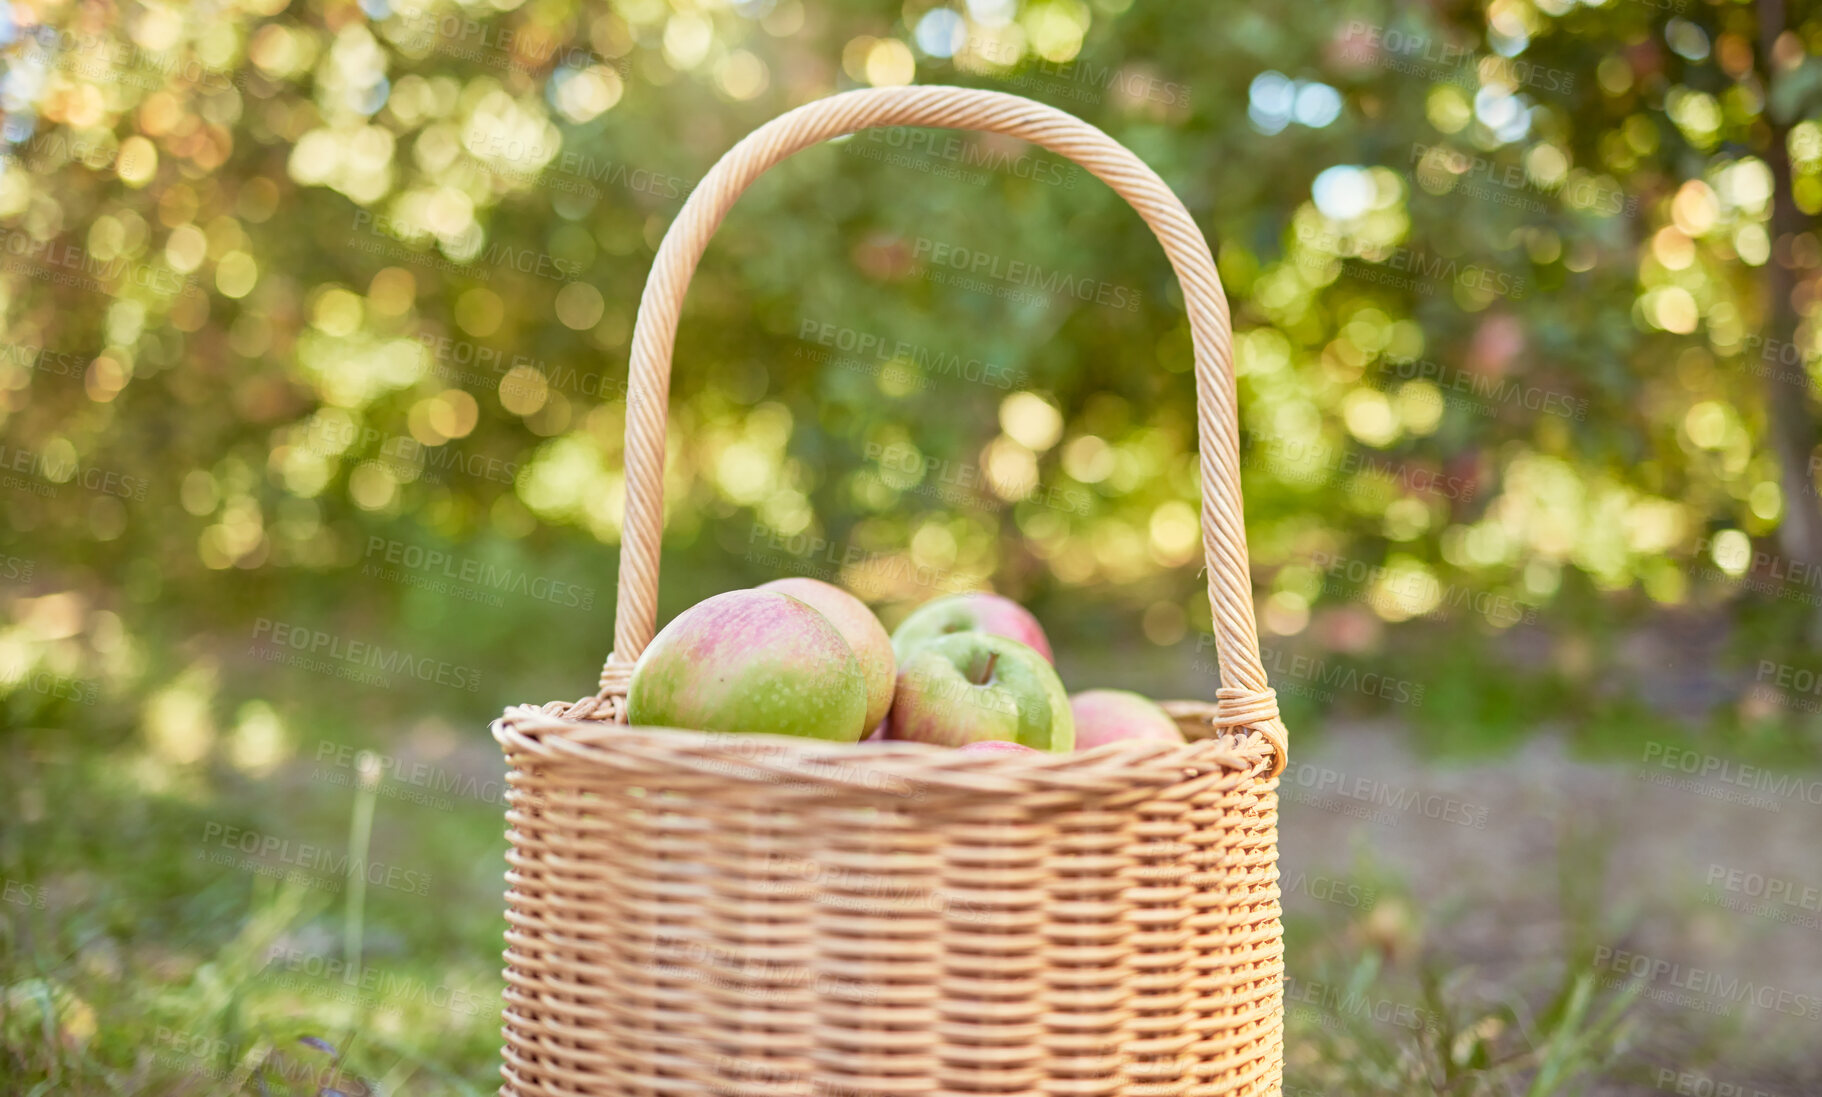 Buy stock photo Closeup apples in a basket on a farm. Fresh agricultural produce ready for harvest time after growing in season. Ripe and ready for eating. Fruit is a healthy vegan snack for dieting